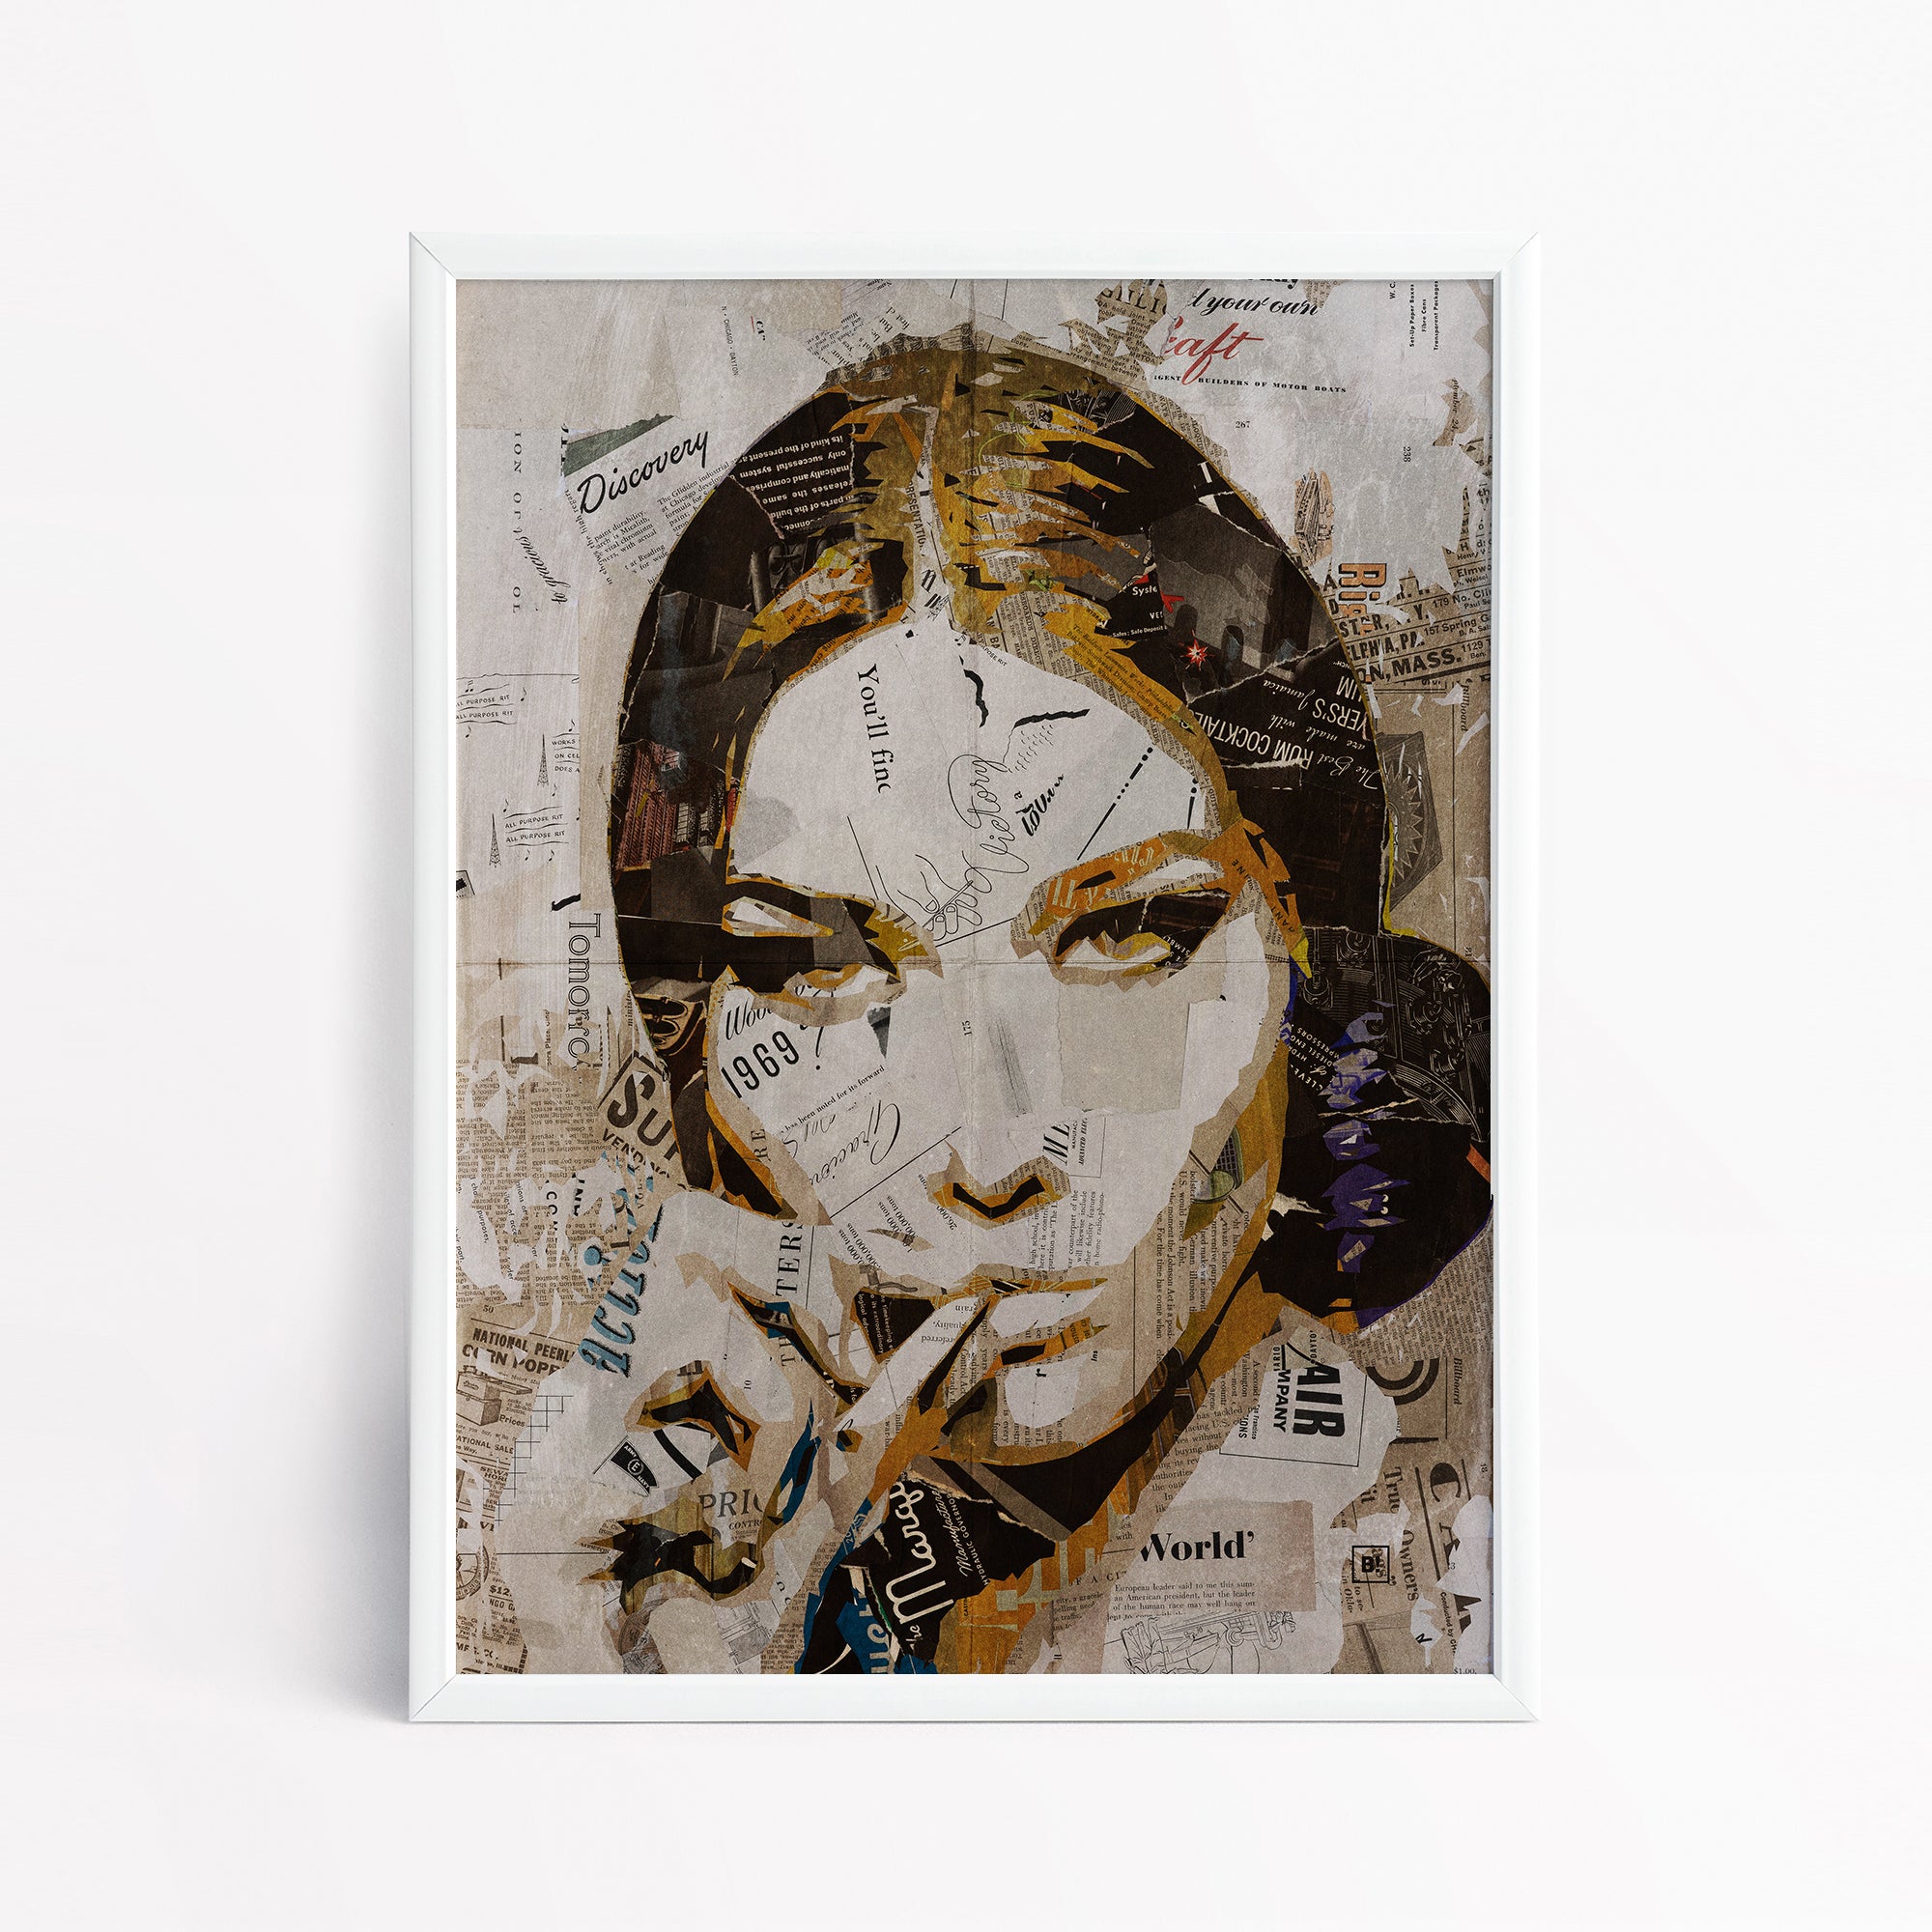 Be inspired by our iconic collage portrait art print of Carla Bruni. This artwork has been printed using the giclée process on archival acid-free paper and is presented in a sleek white frame, showcasing its timeless beauty in every detail.